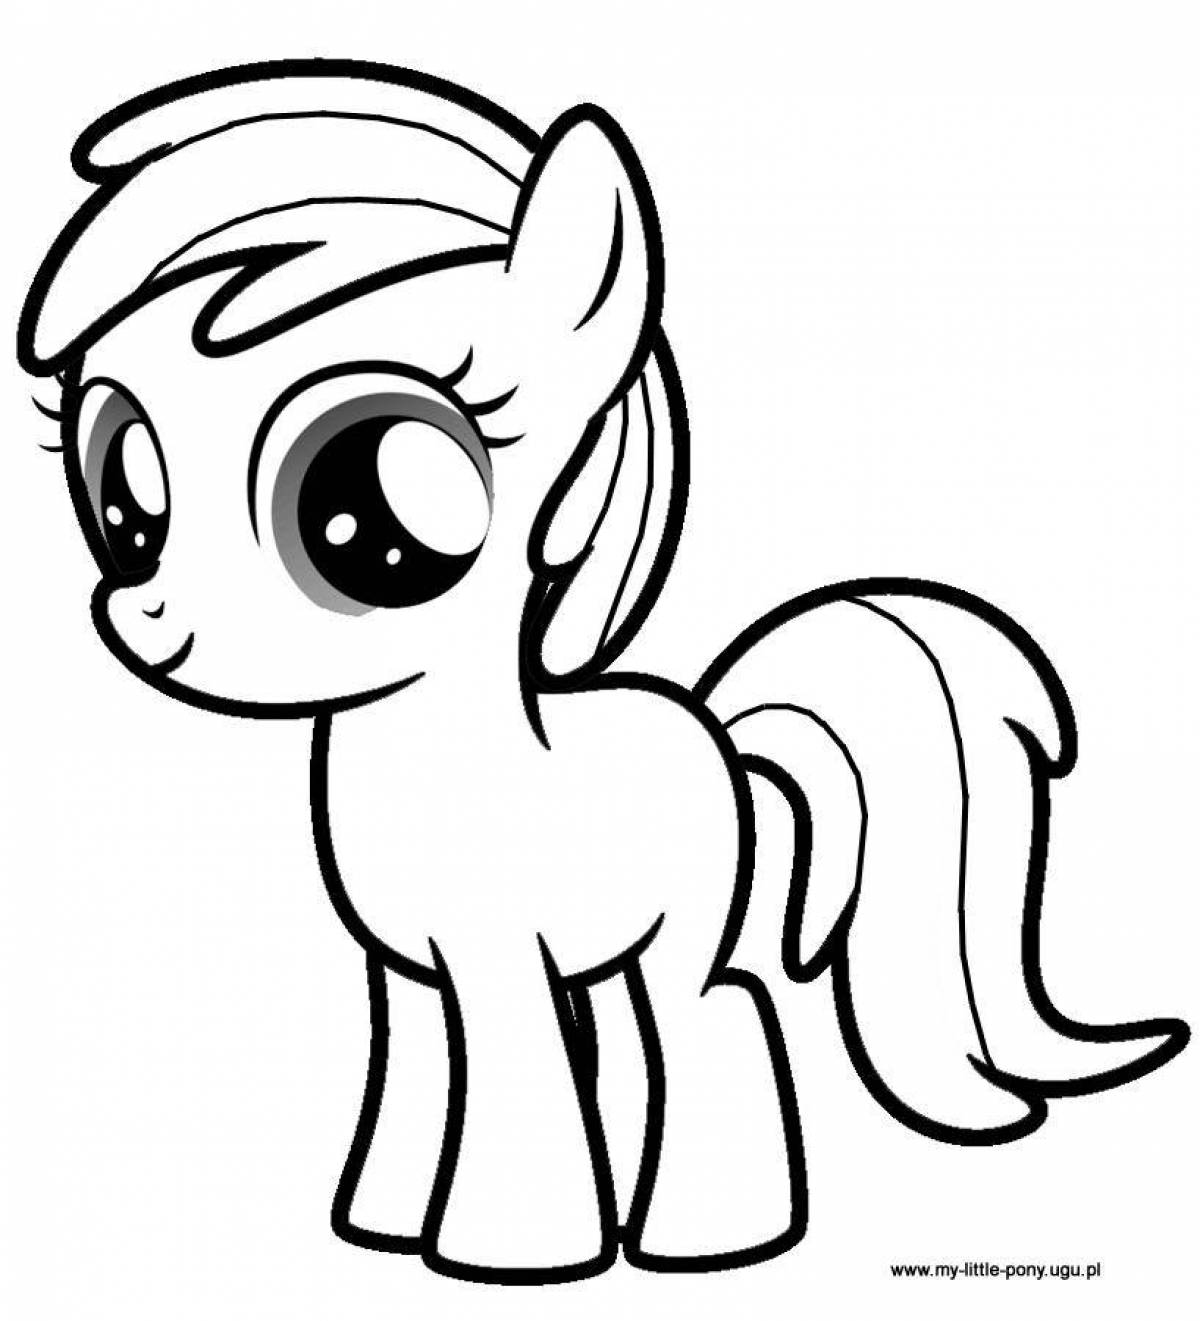 Brilliant pony life coloring page